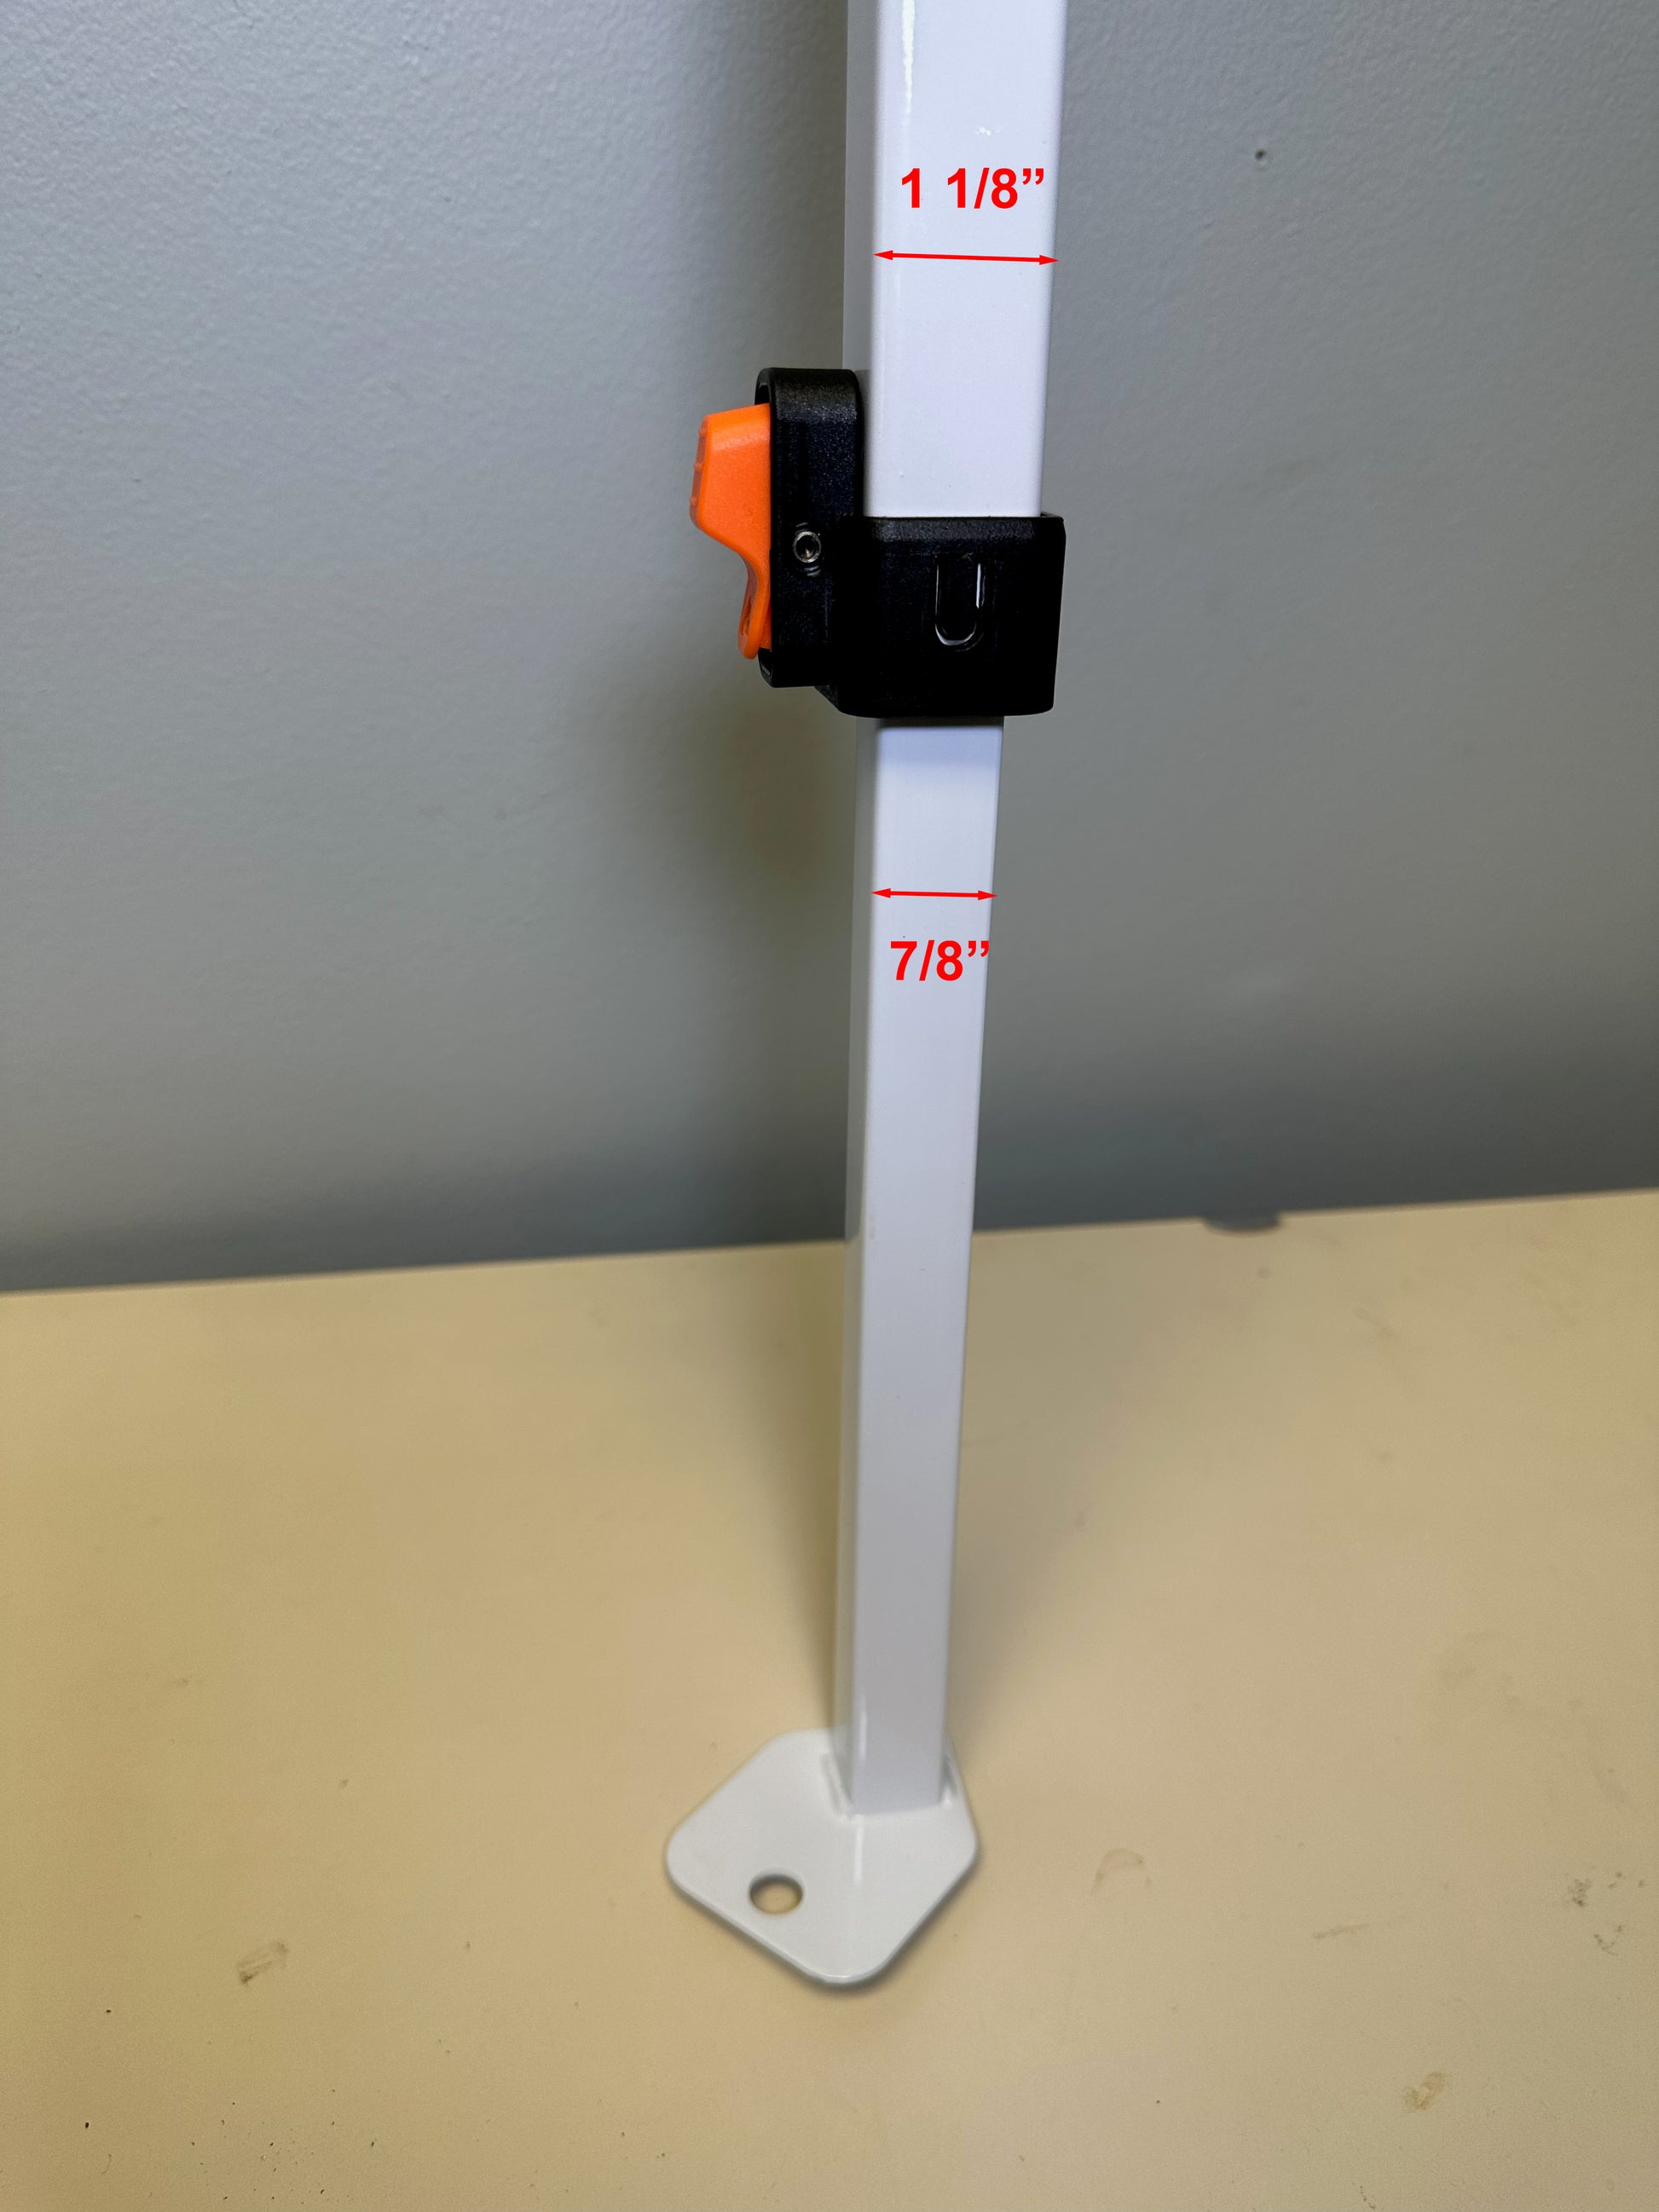 Vertical view of a white canopy leg with a black and orange leg slider attached, indicating measurements of 1 1/8" and 7/8" for different sections of the leg, likely for compatibility with an Ozark Trail canopy structure